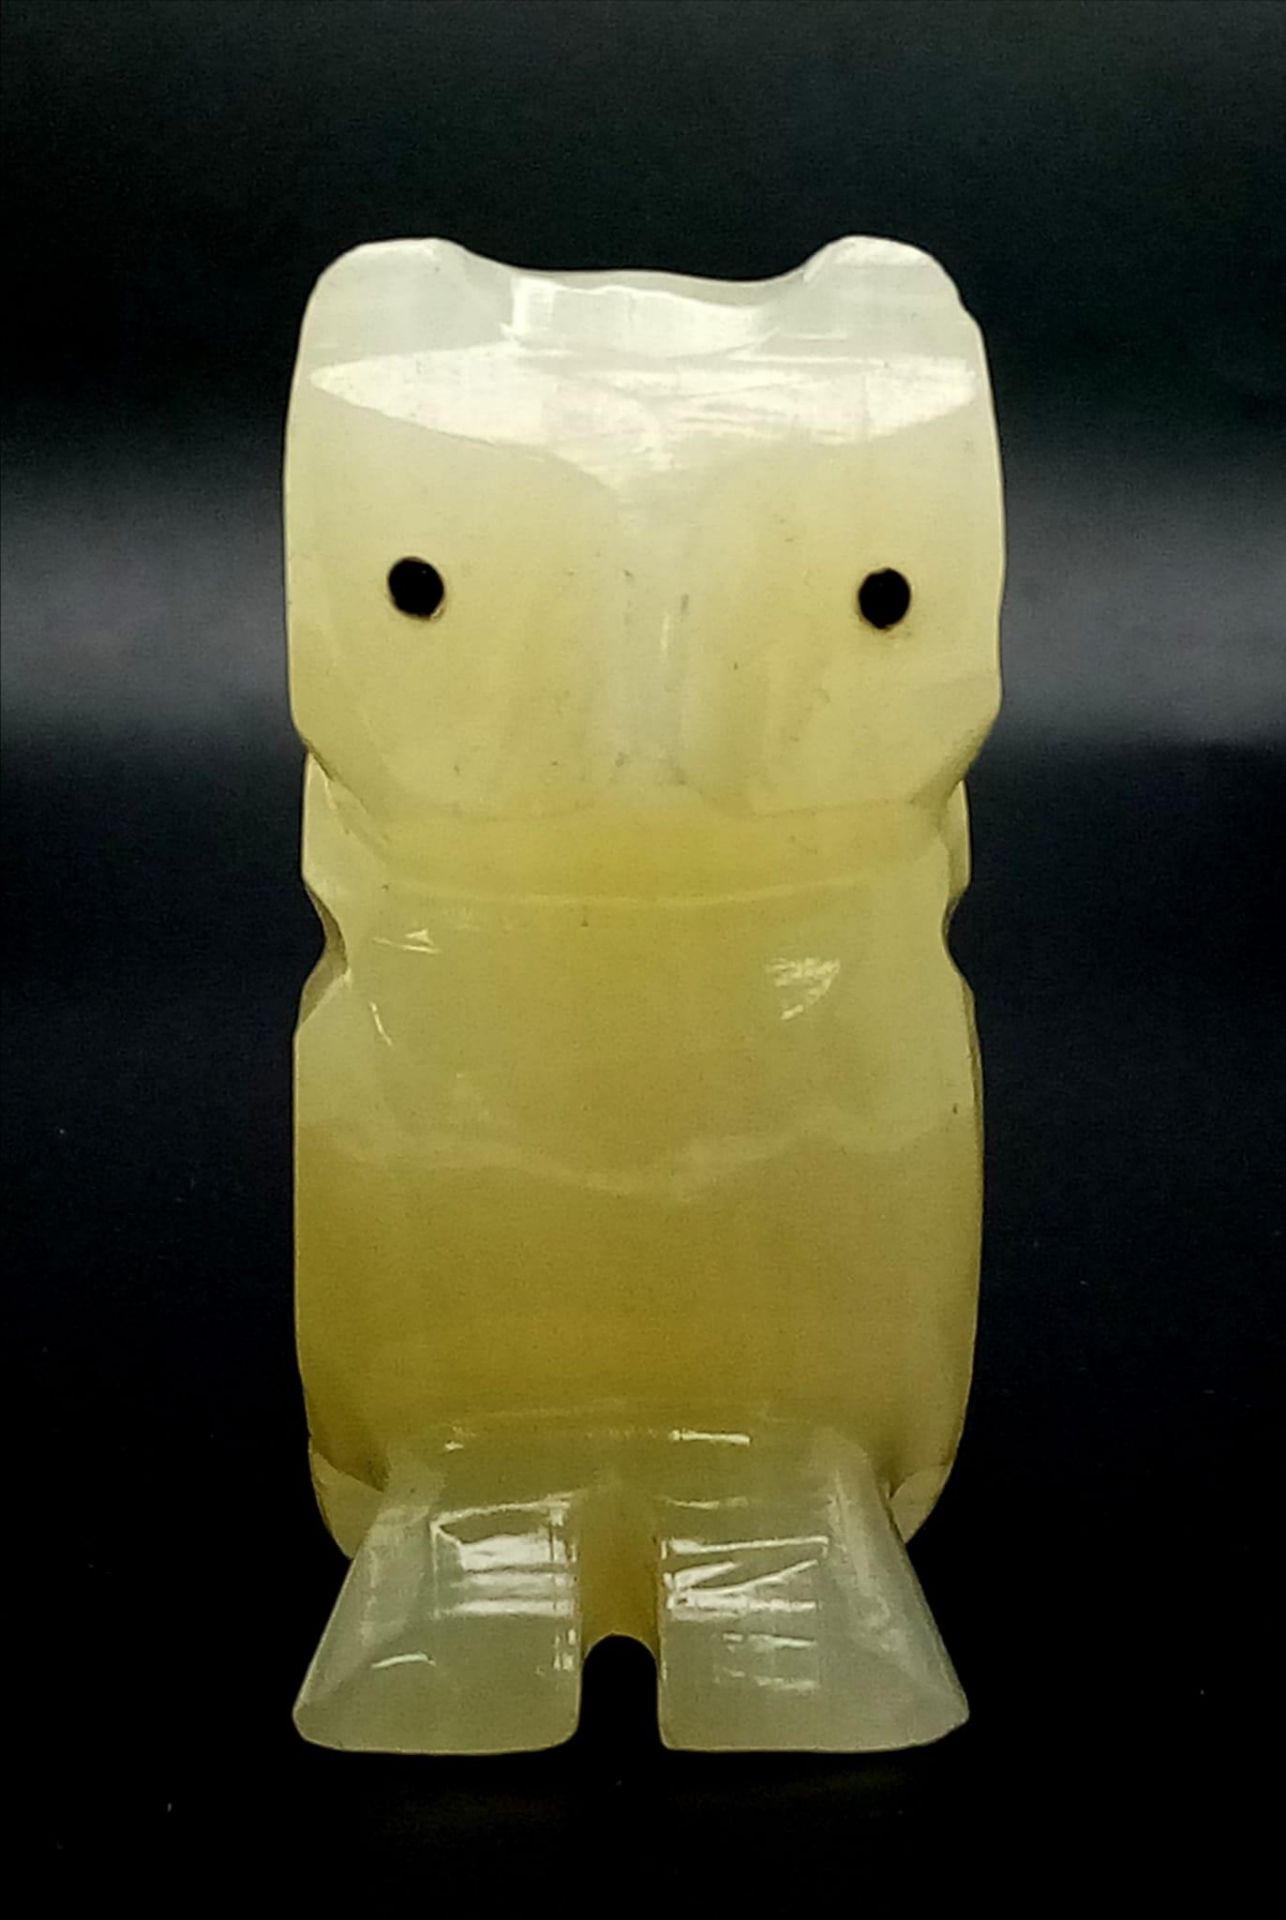 A Hand-Carved Chinese Pale Green Jade Owl Figurine. 8cm tall. 138g weight.